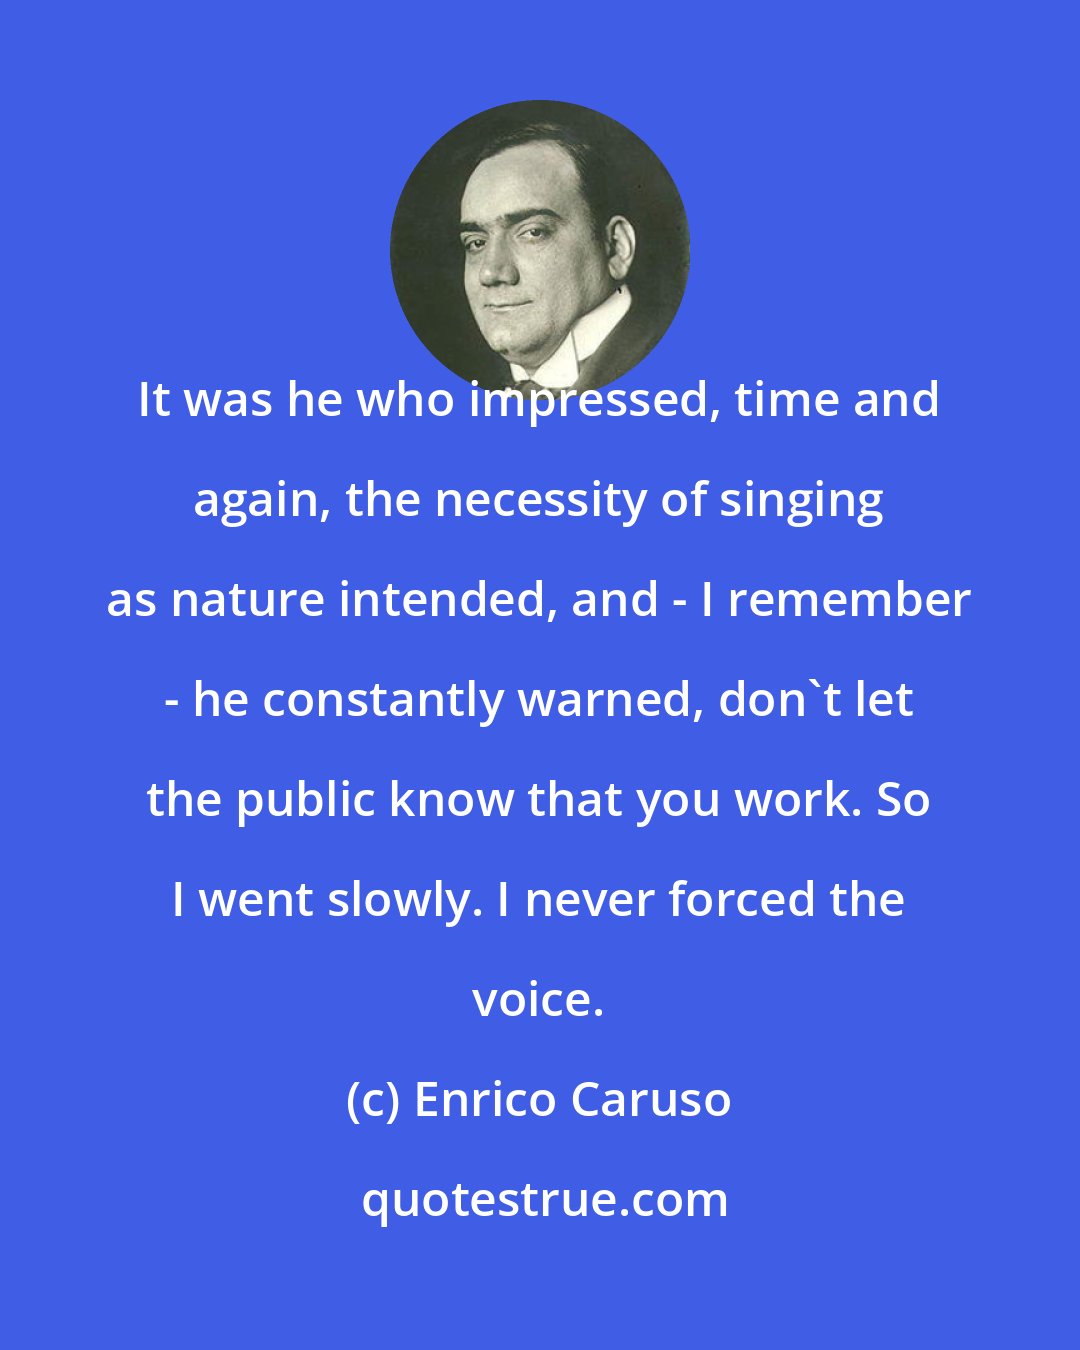 Enrico Caruso: It was he who impressed, time and again, the necessity of singing as nature intended, and - I remember - he constantly warned, don't let the public know that you work. So I went slowly. I never forced the voice.